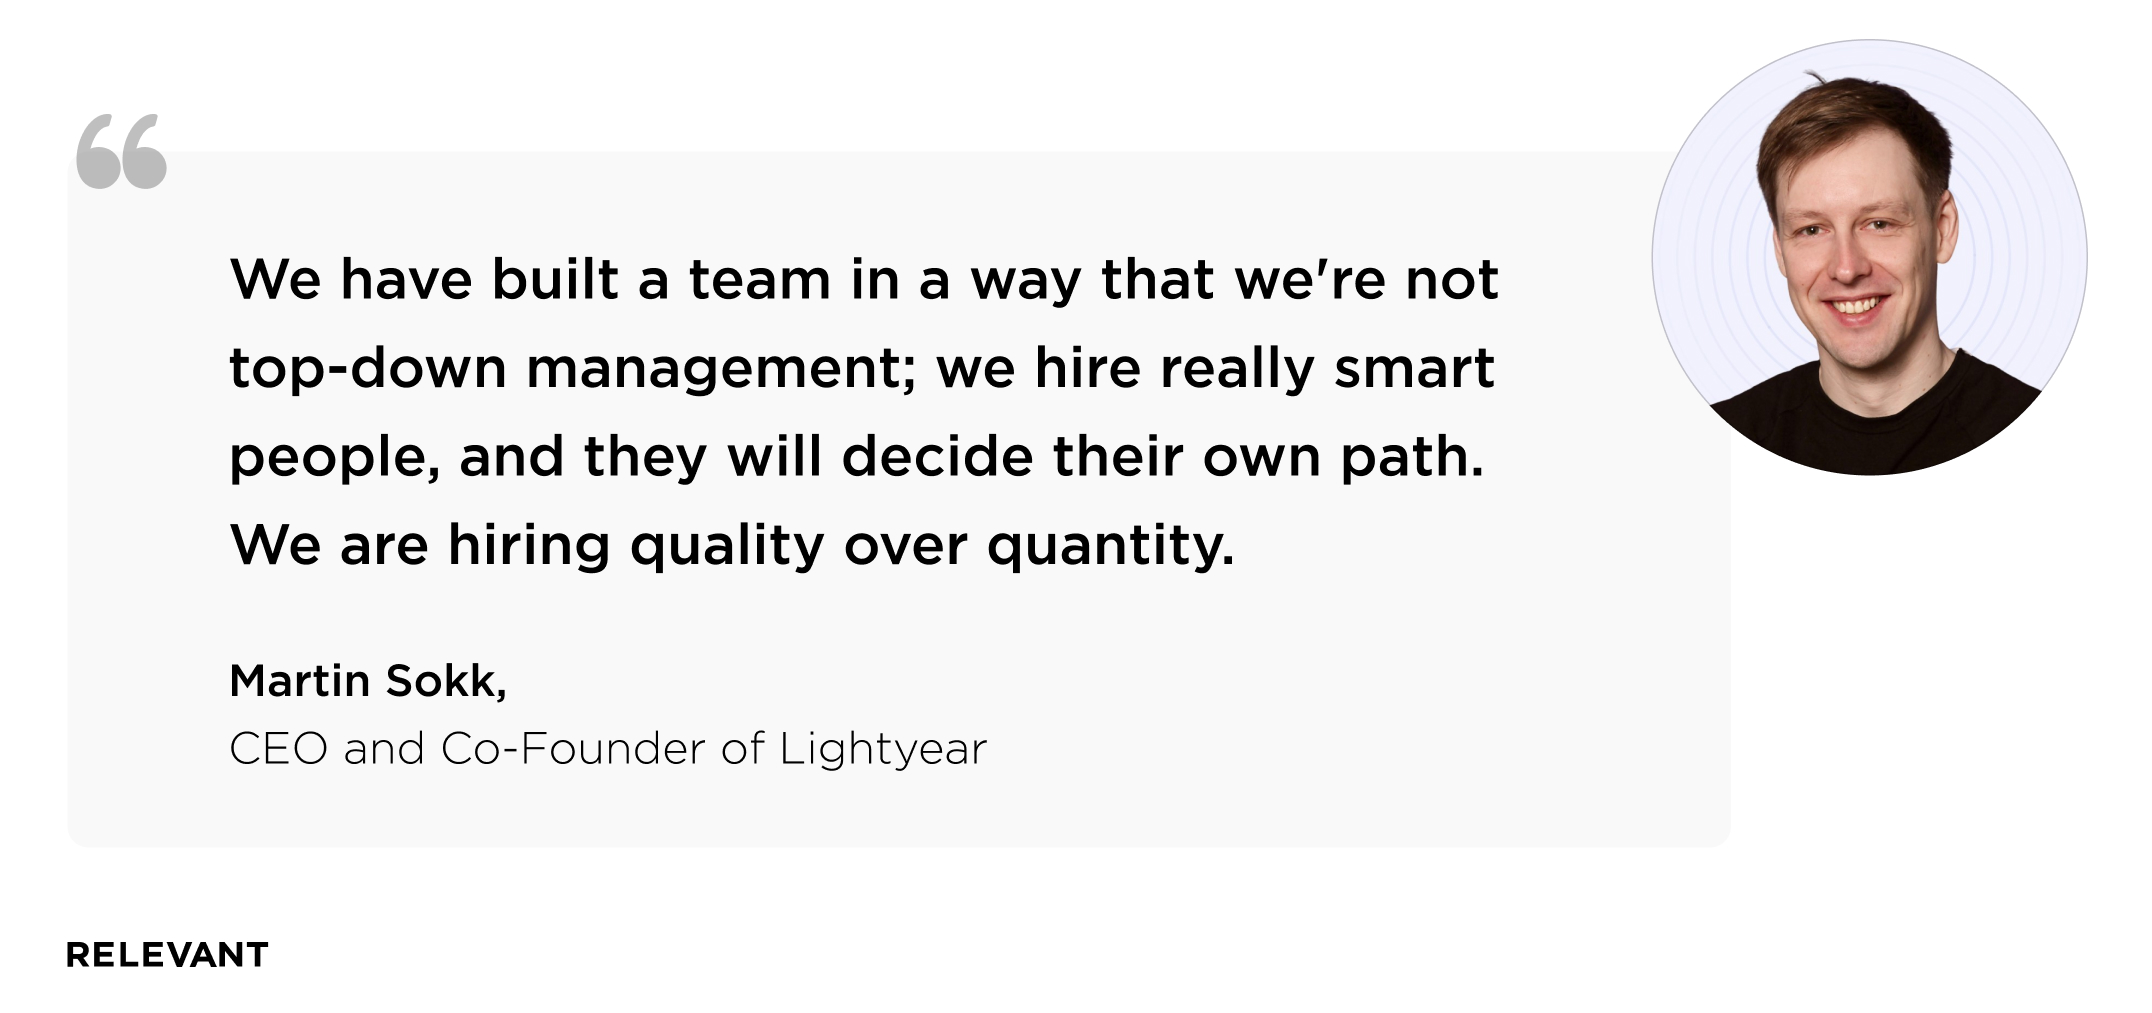 “We have built a team in a way that we're not top-down management; we hire really smart people, and they will decide their own path. We are hiring quality over quantity.” Martin Sokk, CEO and co-founder of  Lightyear